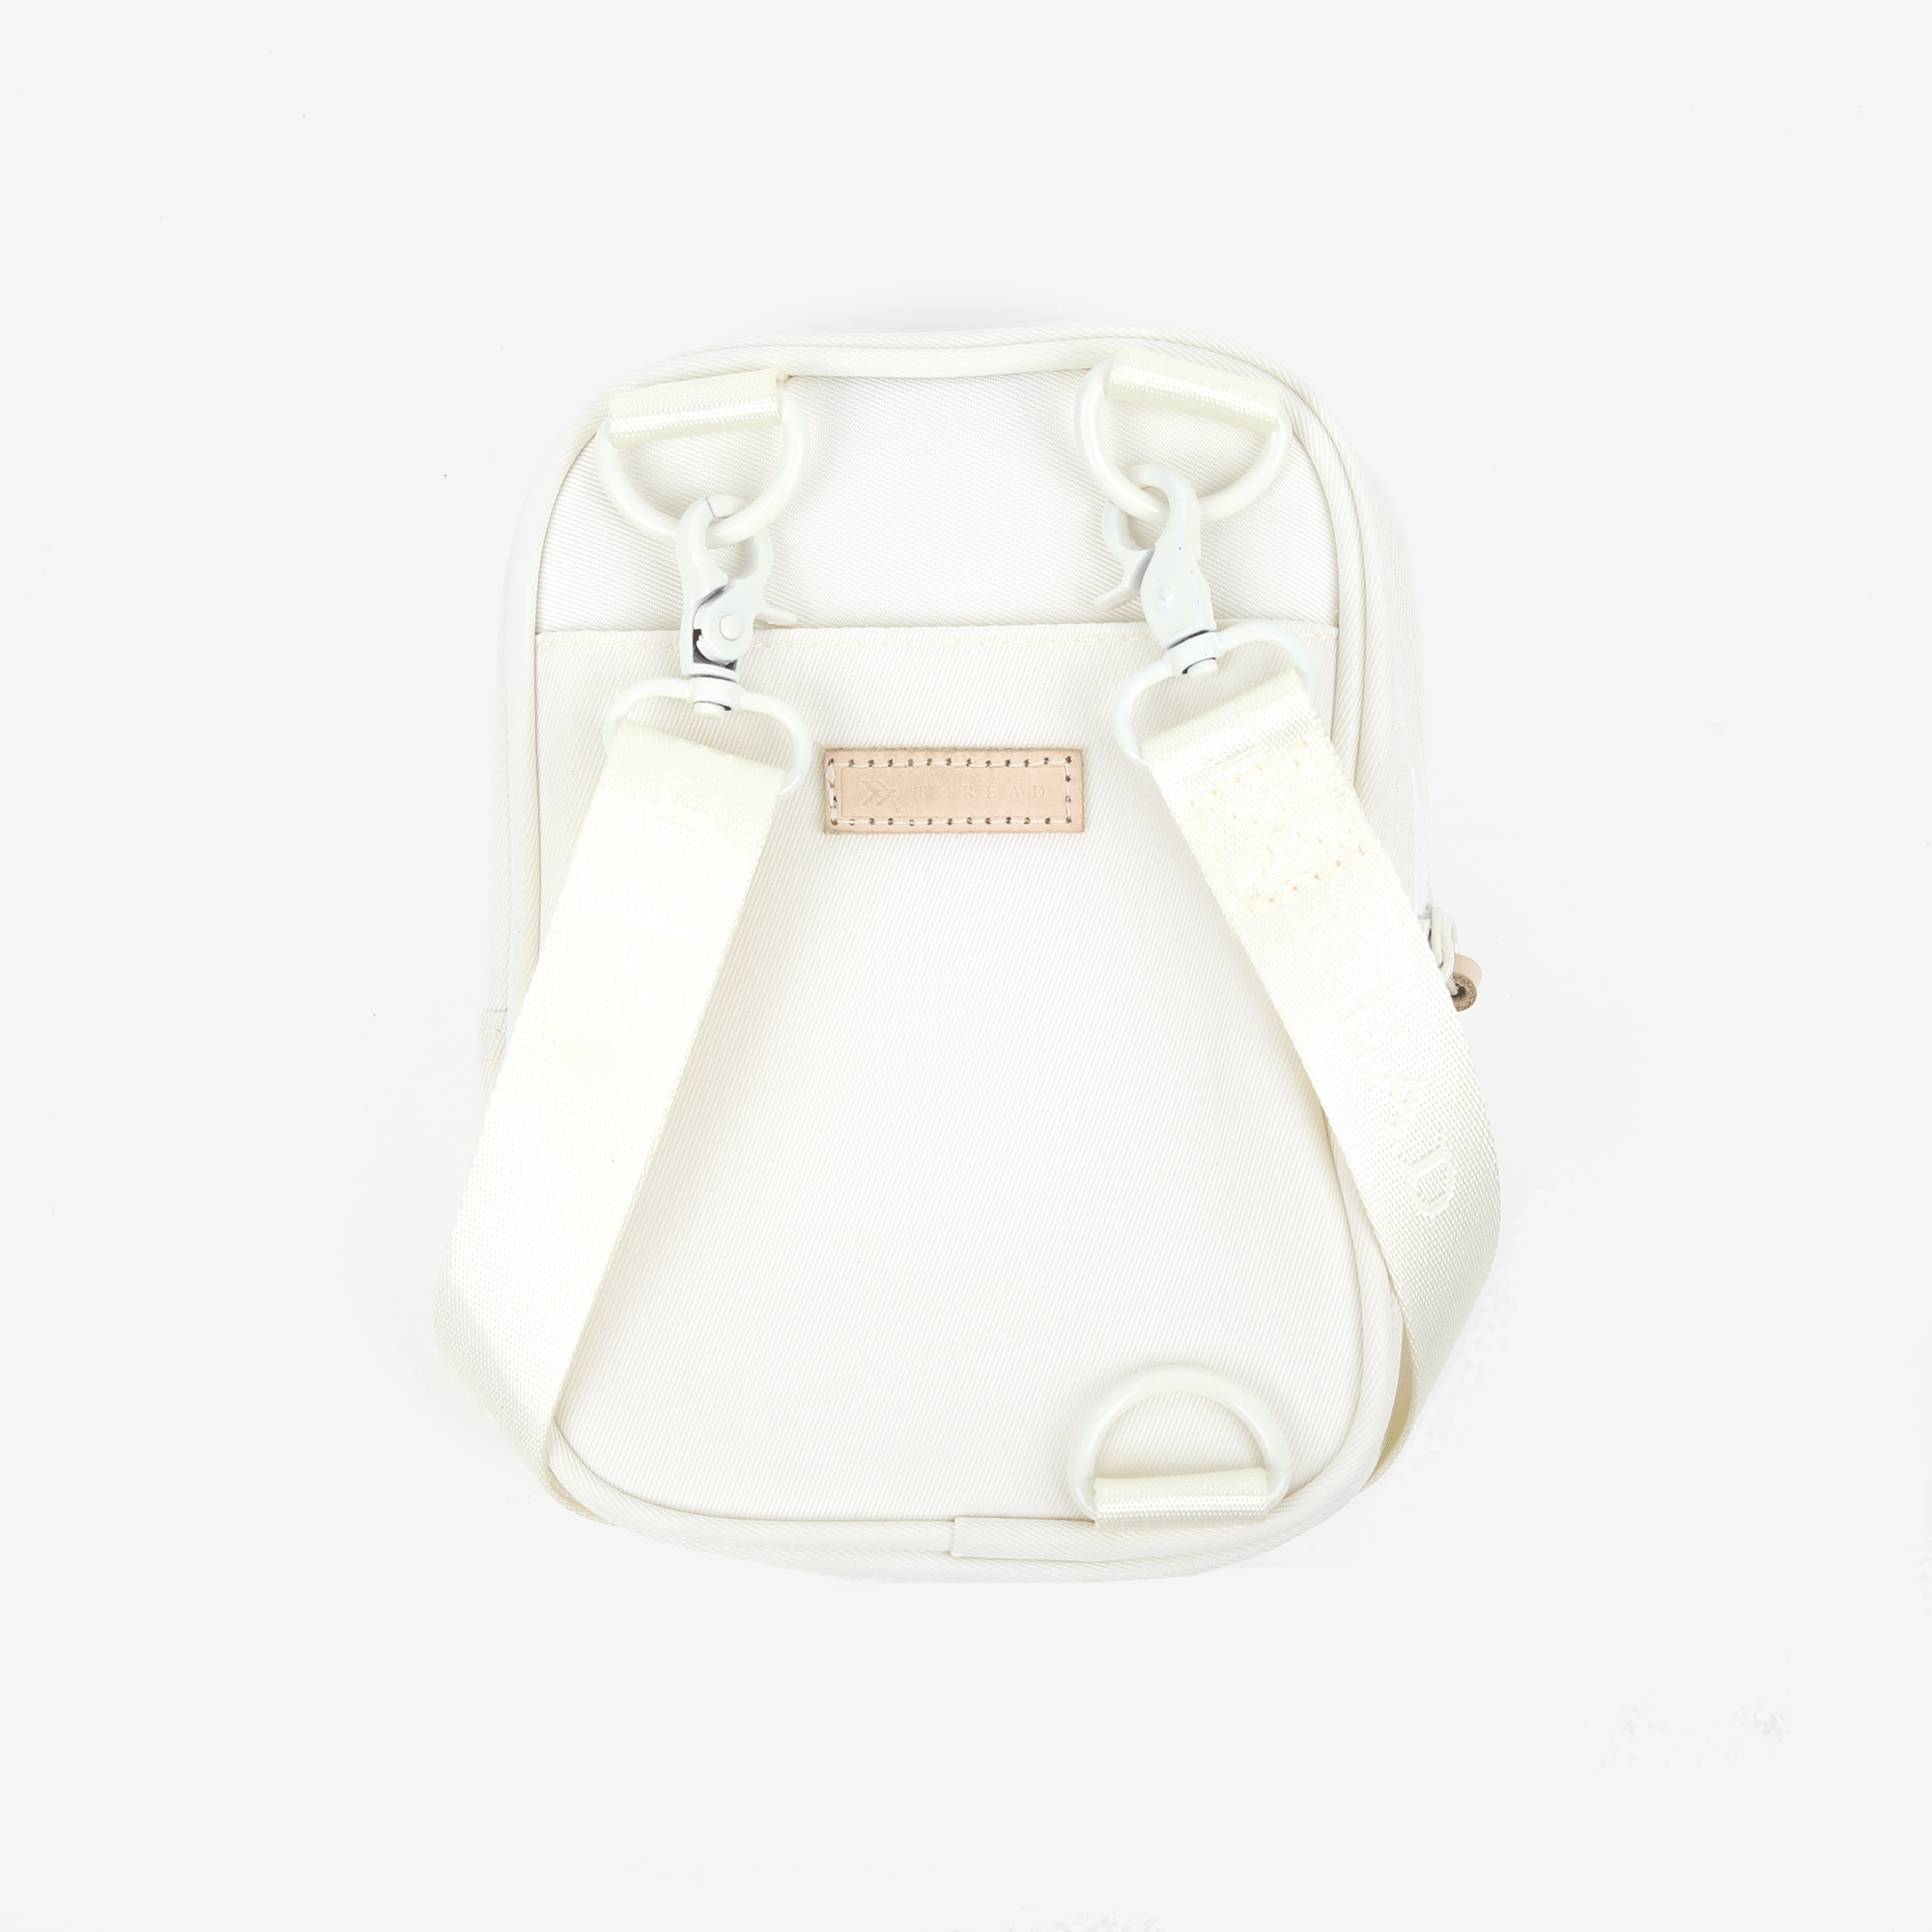 The Uspeclare Clear Crossbody Bag Is Just $13 on